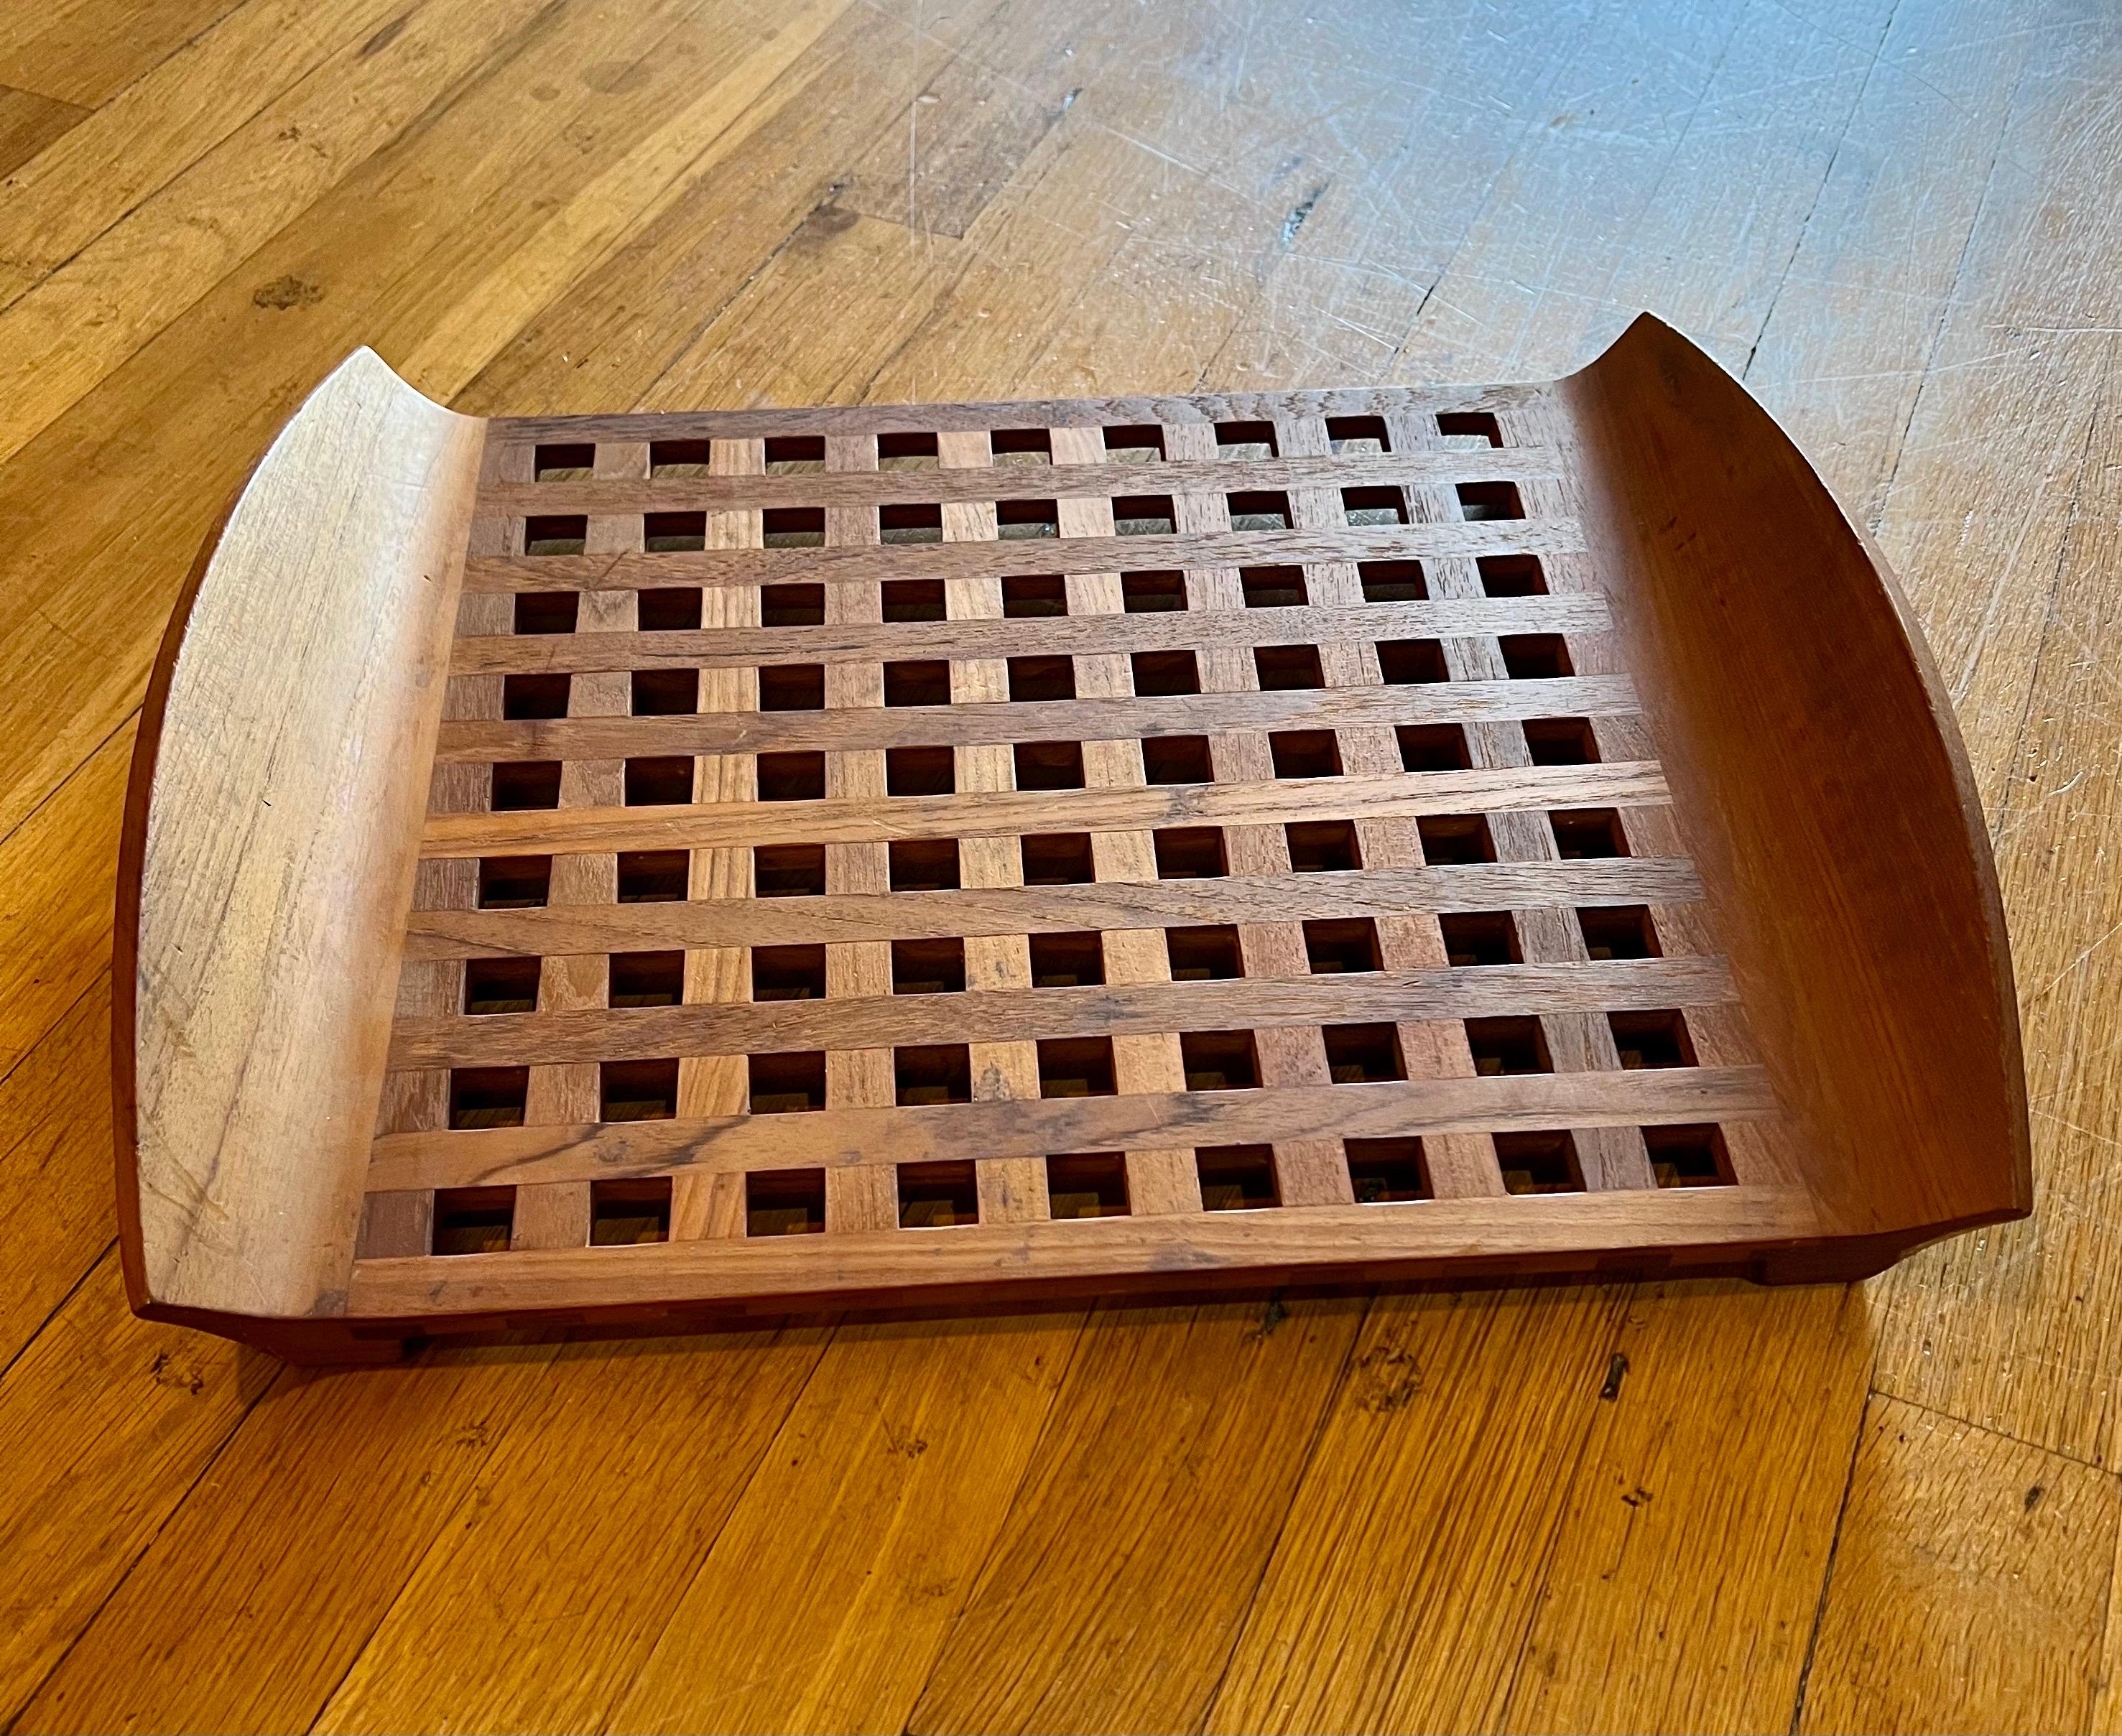 1950s Solid Teak Danish Modern Rare XLarge Tray Designed by Quistgaard for Dansk In Excellent Condition For Sale In San Diego, CA